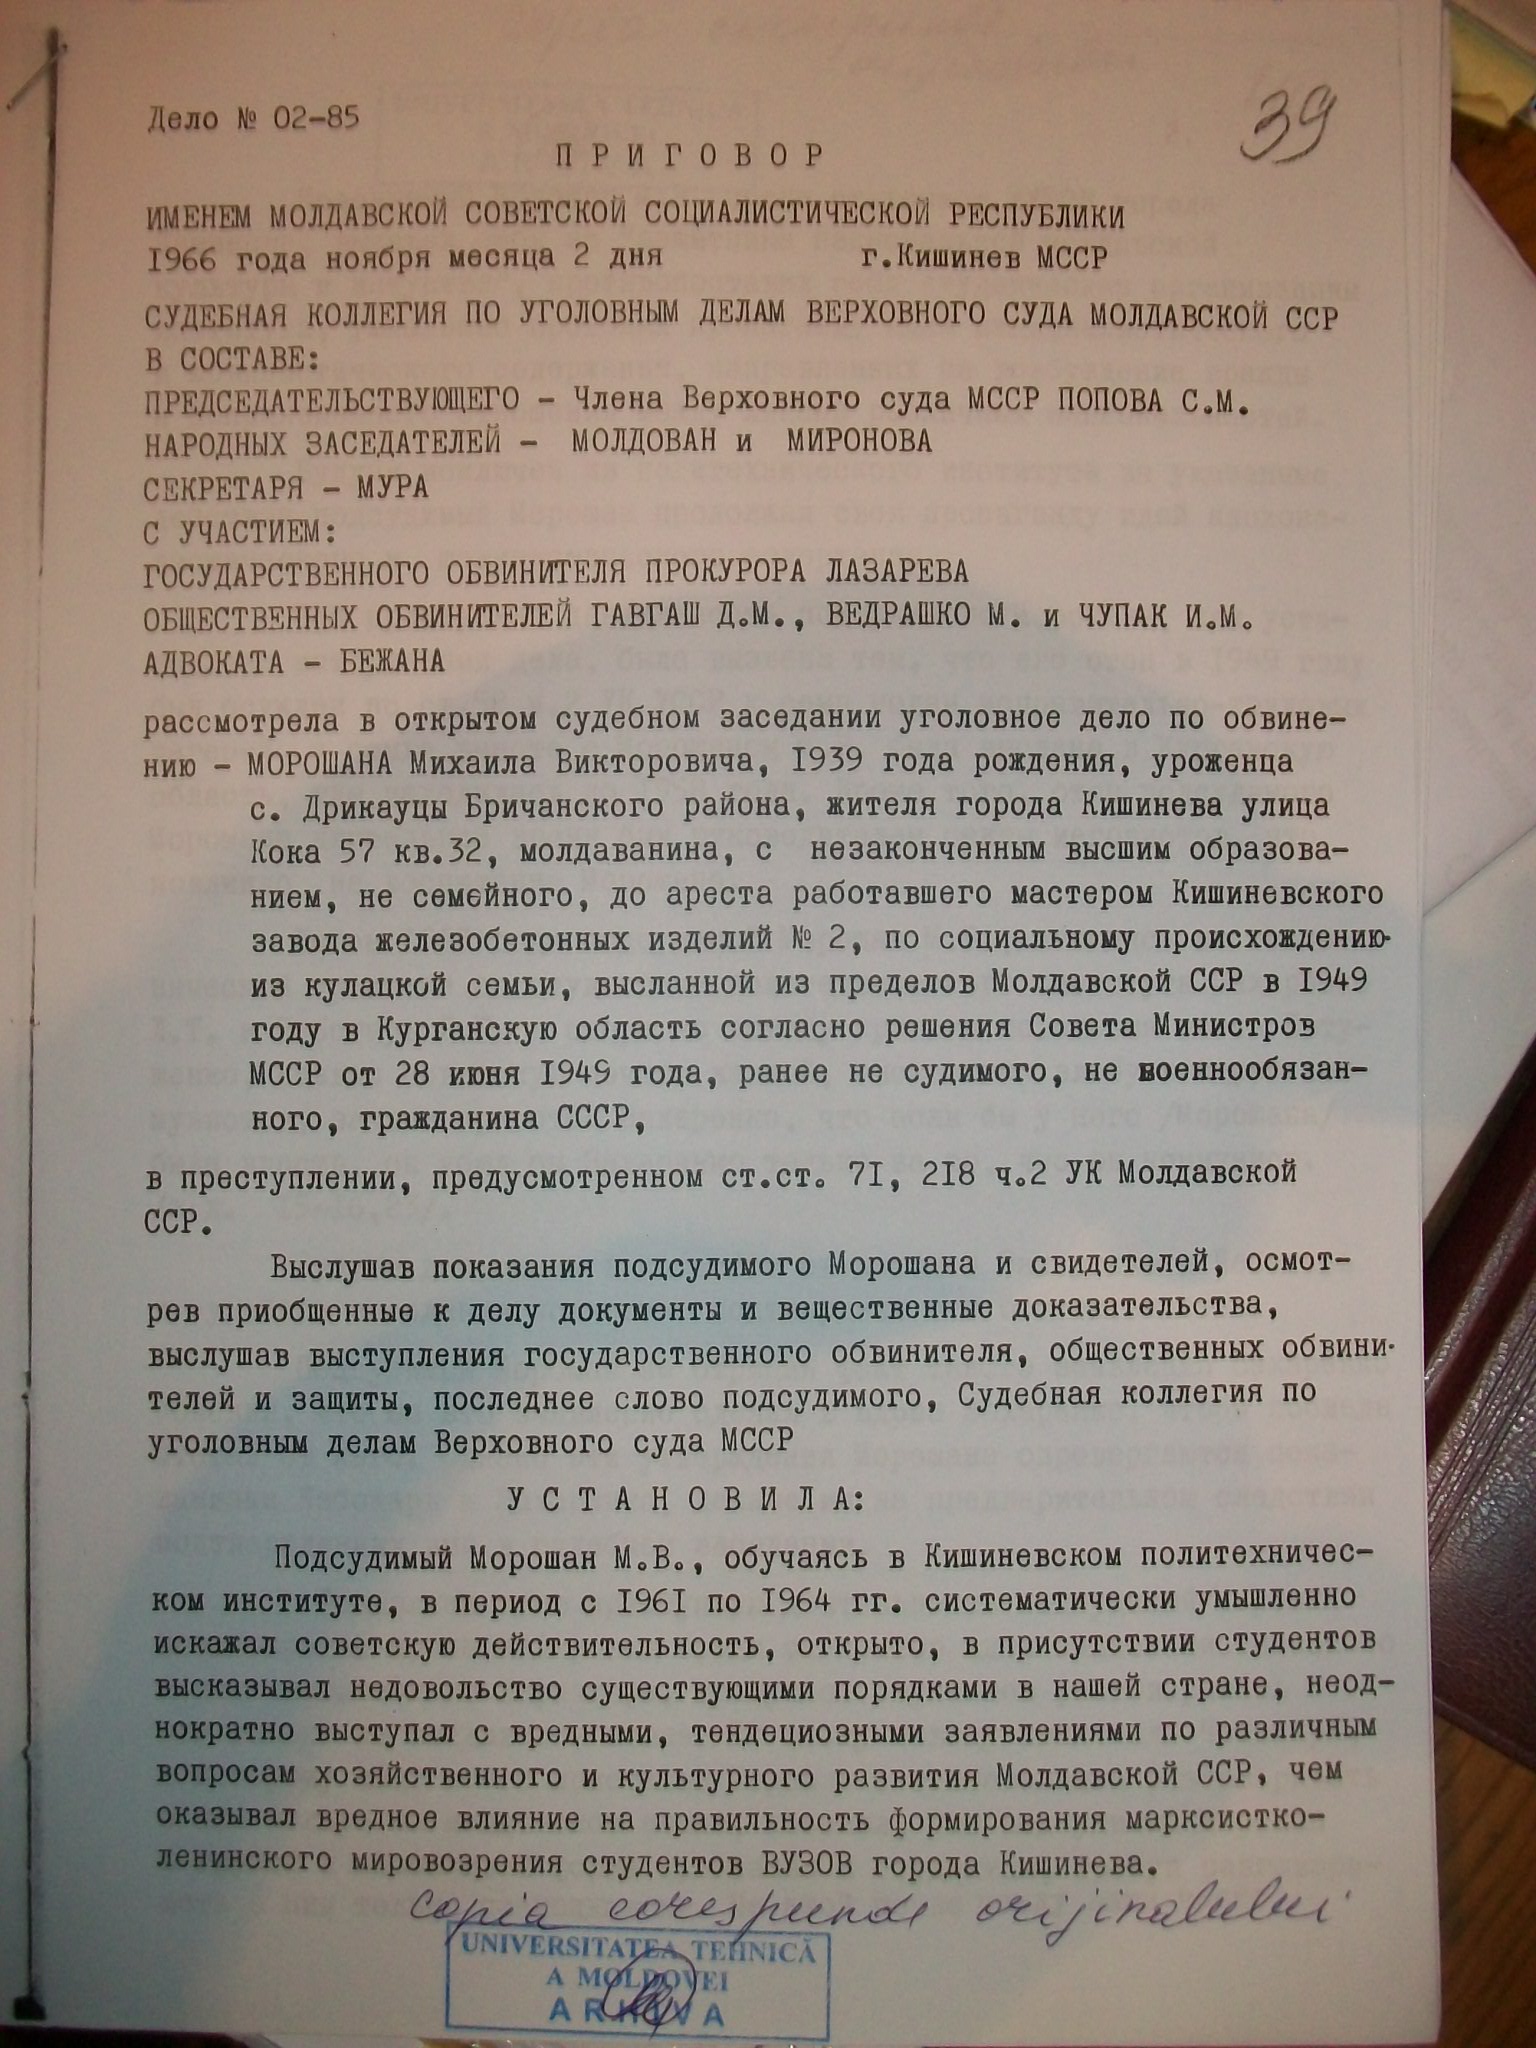 First Page of the Official Sentence in the Case of Mihai Moroșanu, 2 November 1966